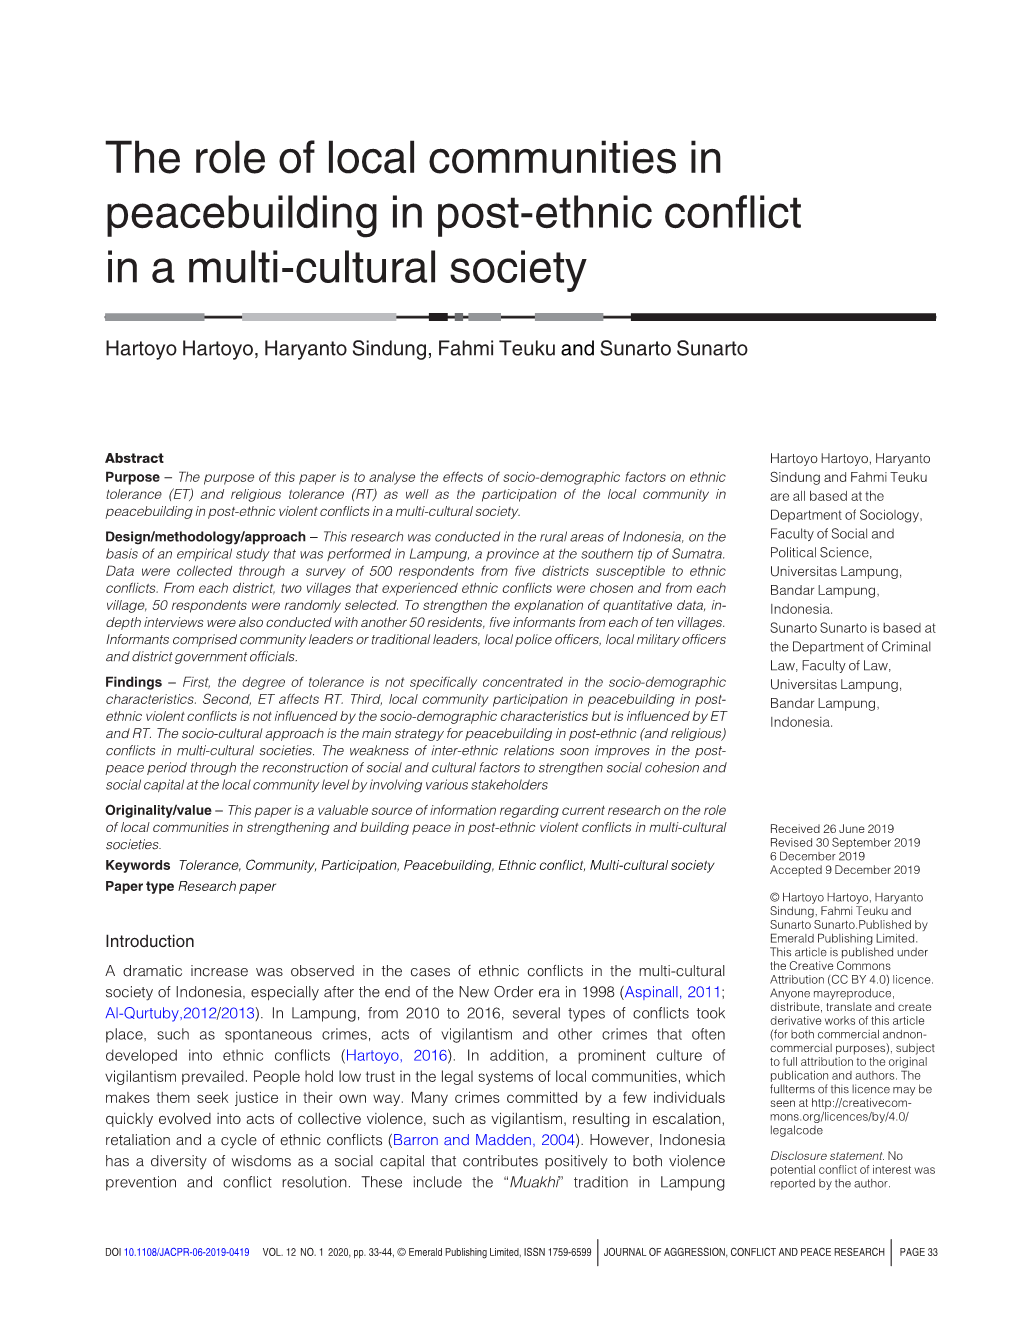 The Role of Local Communities in Peacebuilding in Post-Ethnic Conﬂict in a Multi-Cultural Society